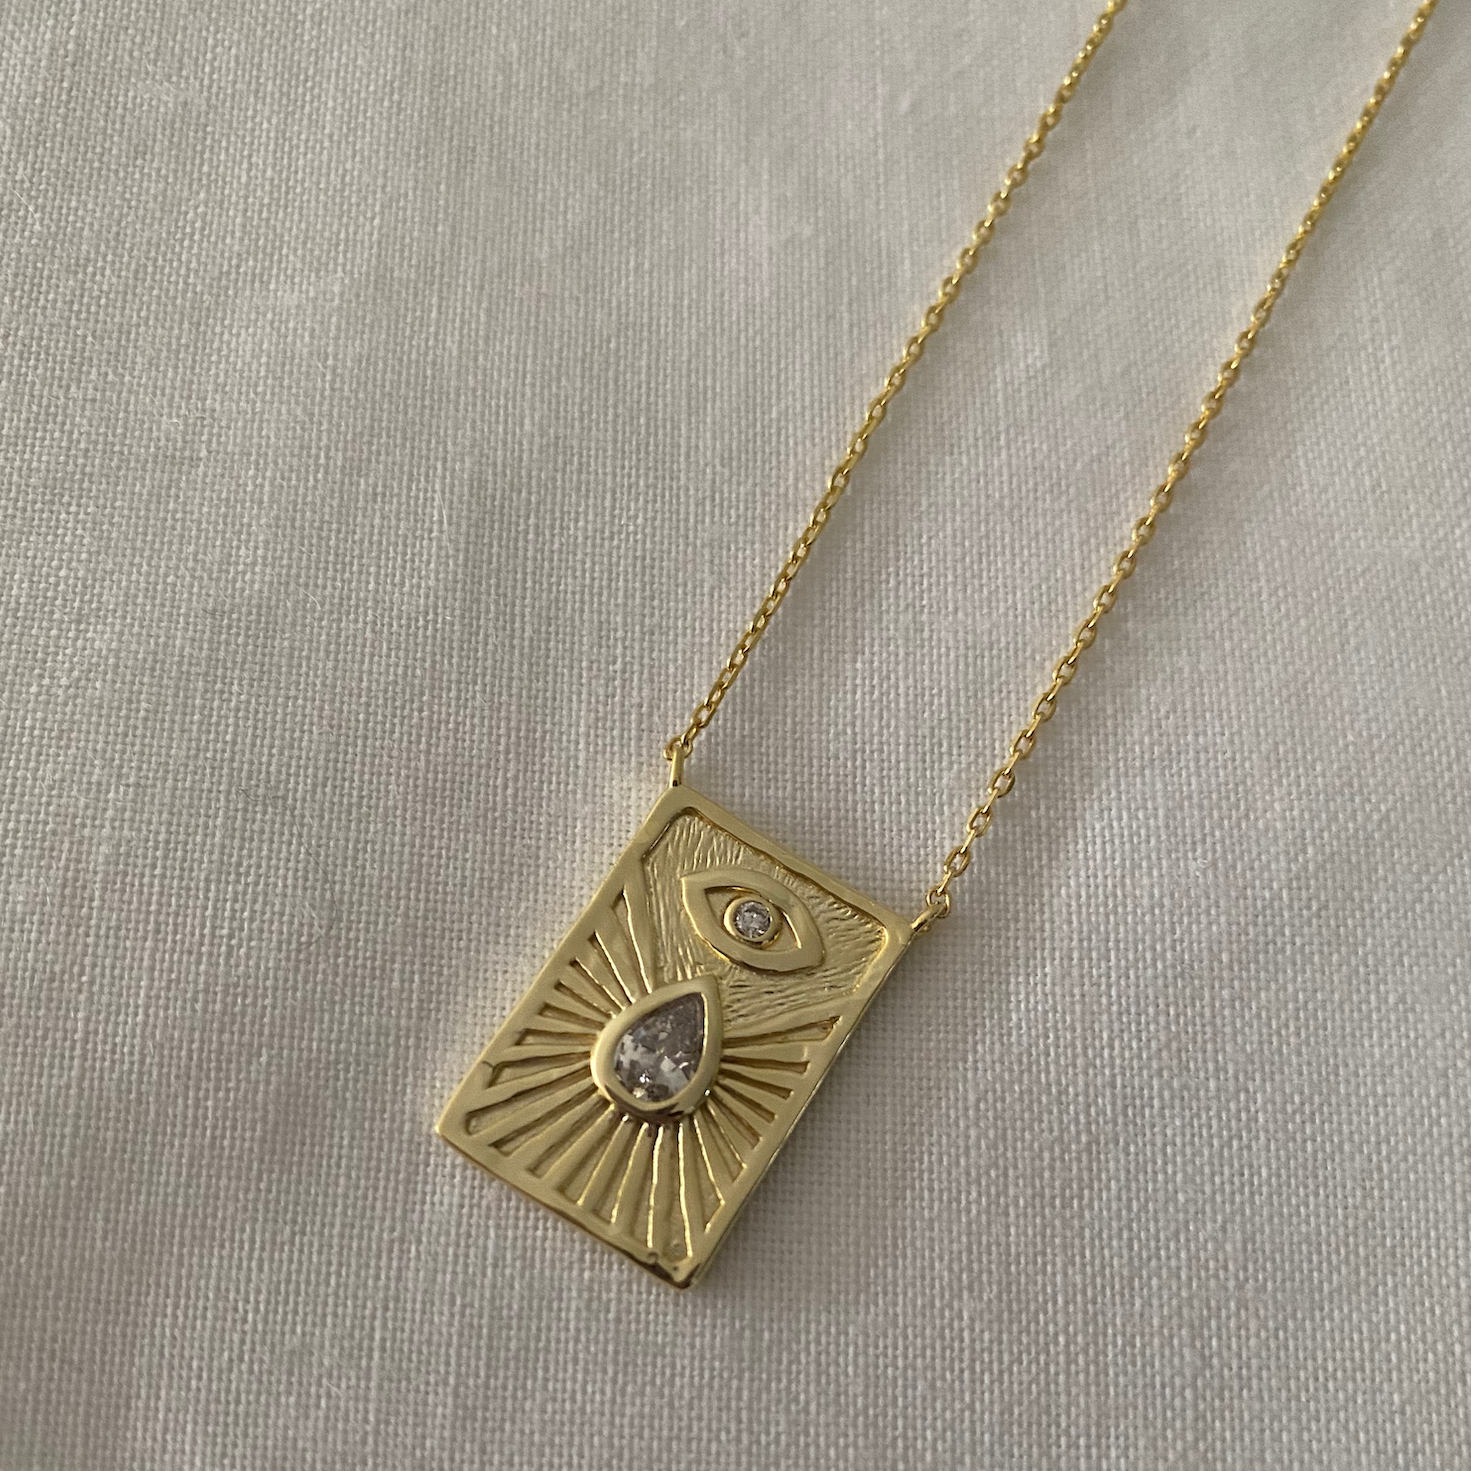 Aphrodite necklace in 18ct Gold plated